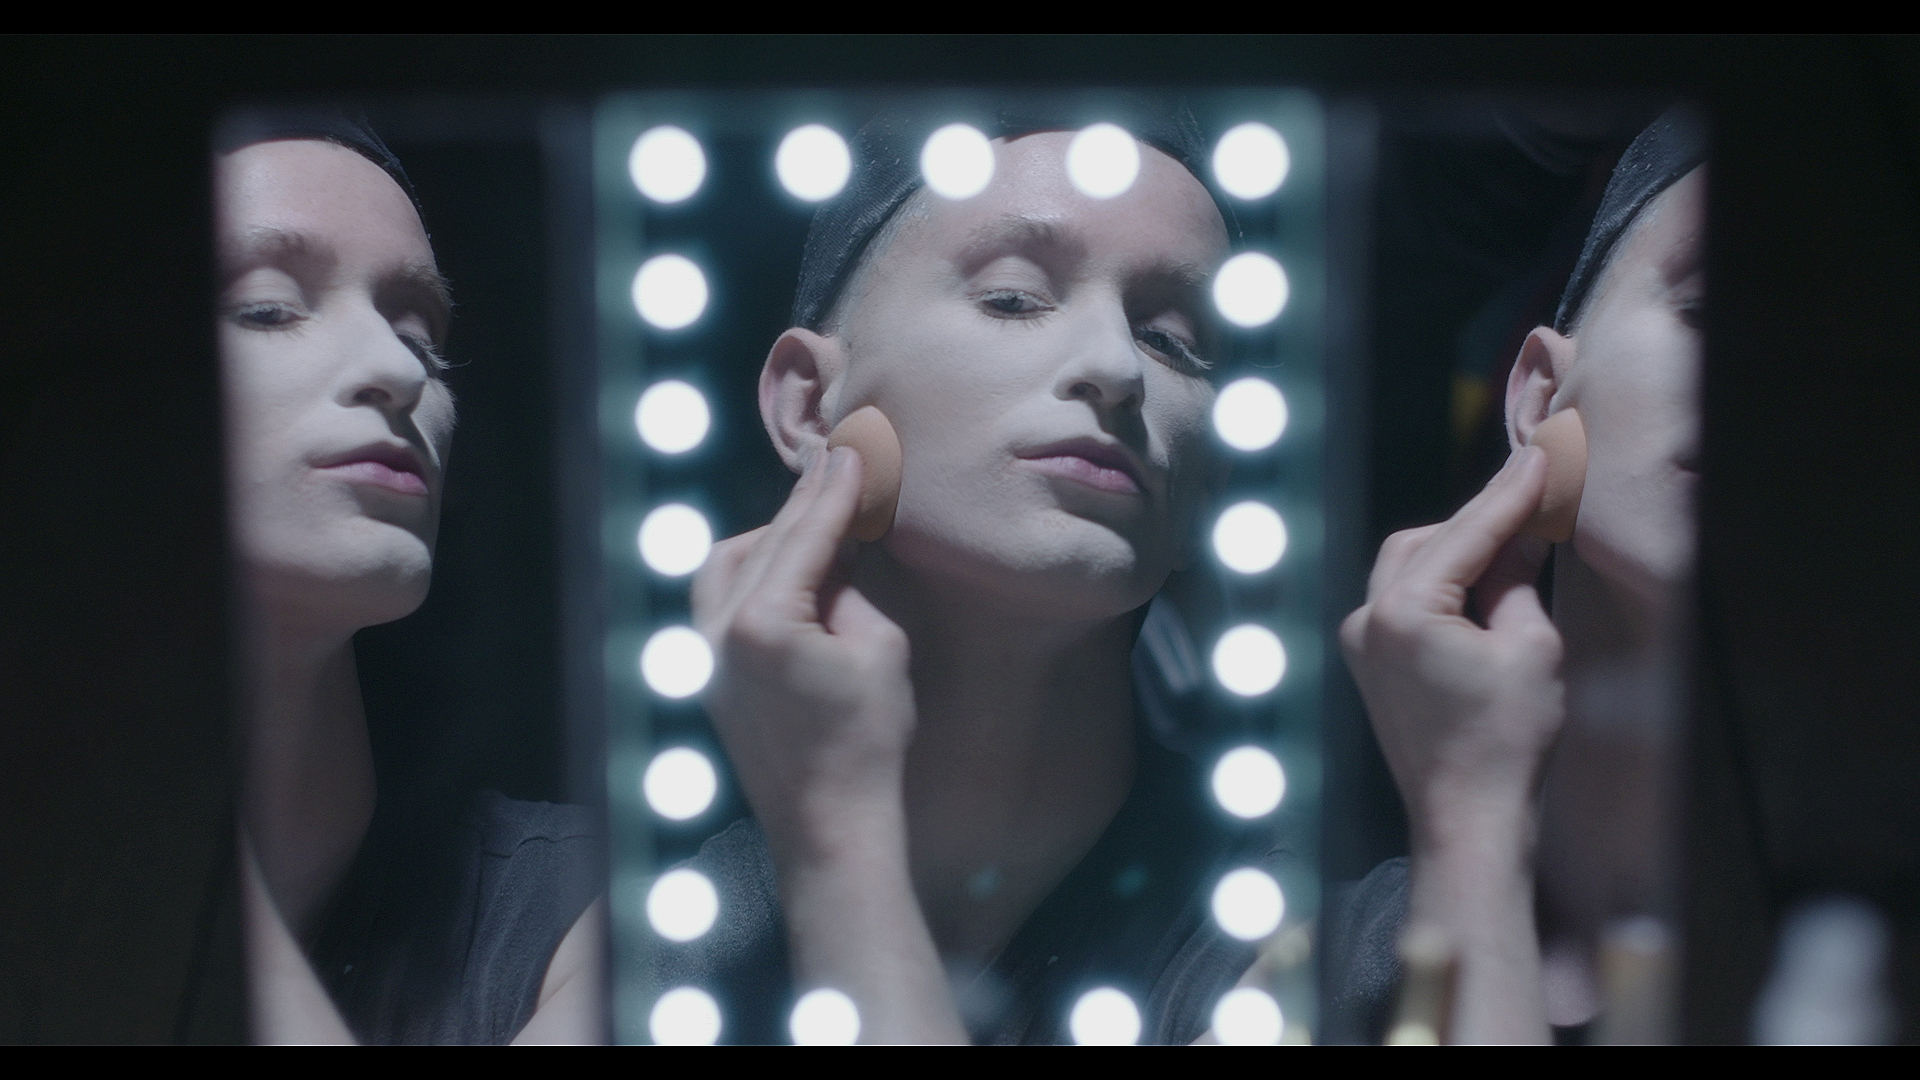 CJ Banks appears looking at herself in three mirrors––one surrounded by lights––powdering white makeup onto her face and wearing a wig cap.